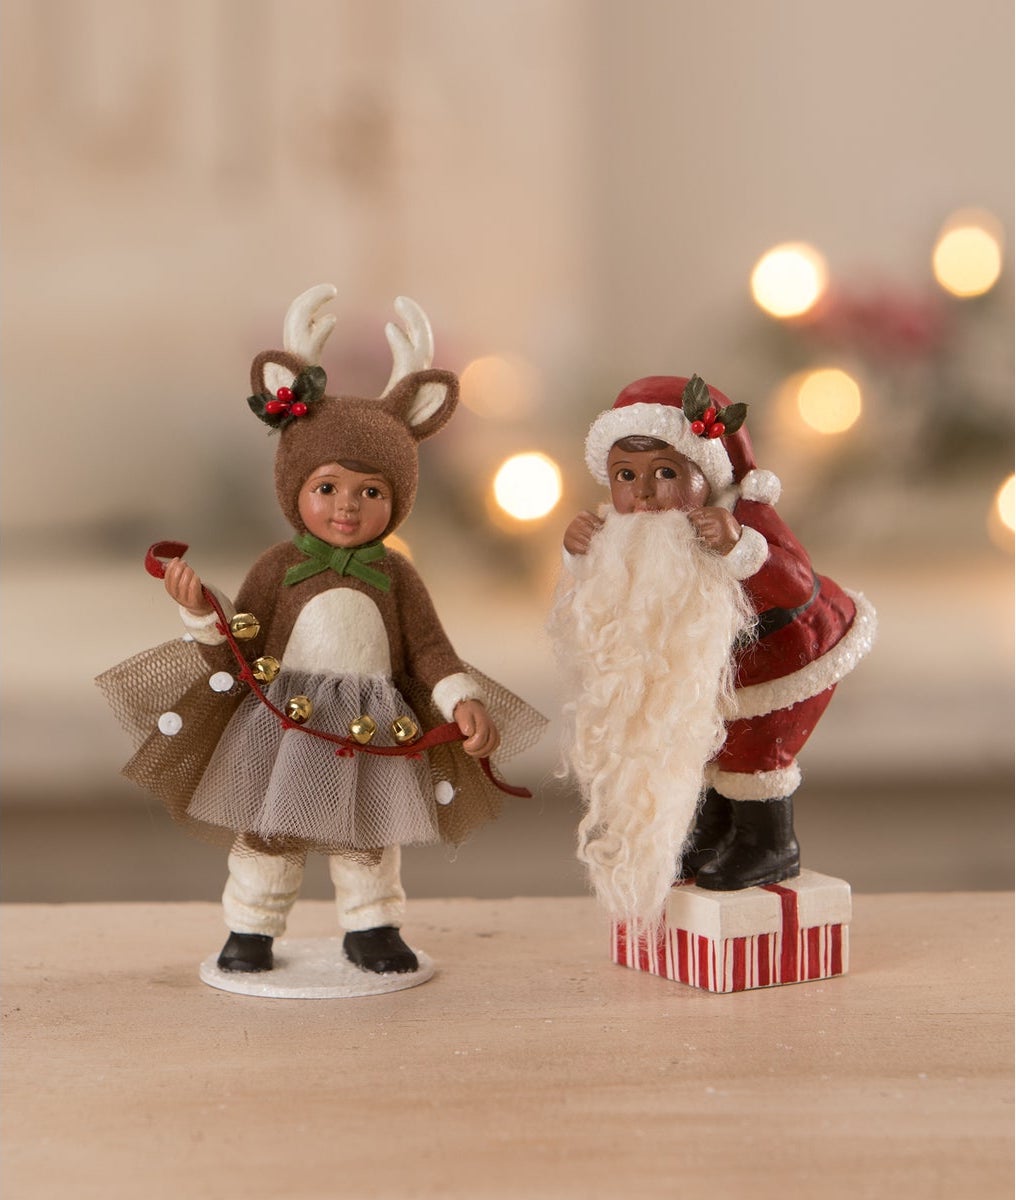 Little Girl Dressed in Reindeer Costume Figurine pictured with boy in Santa suit figurine